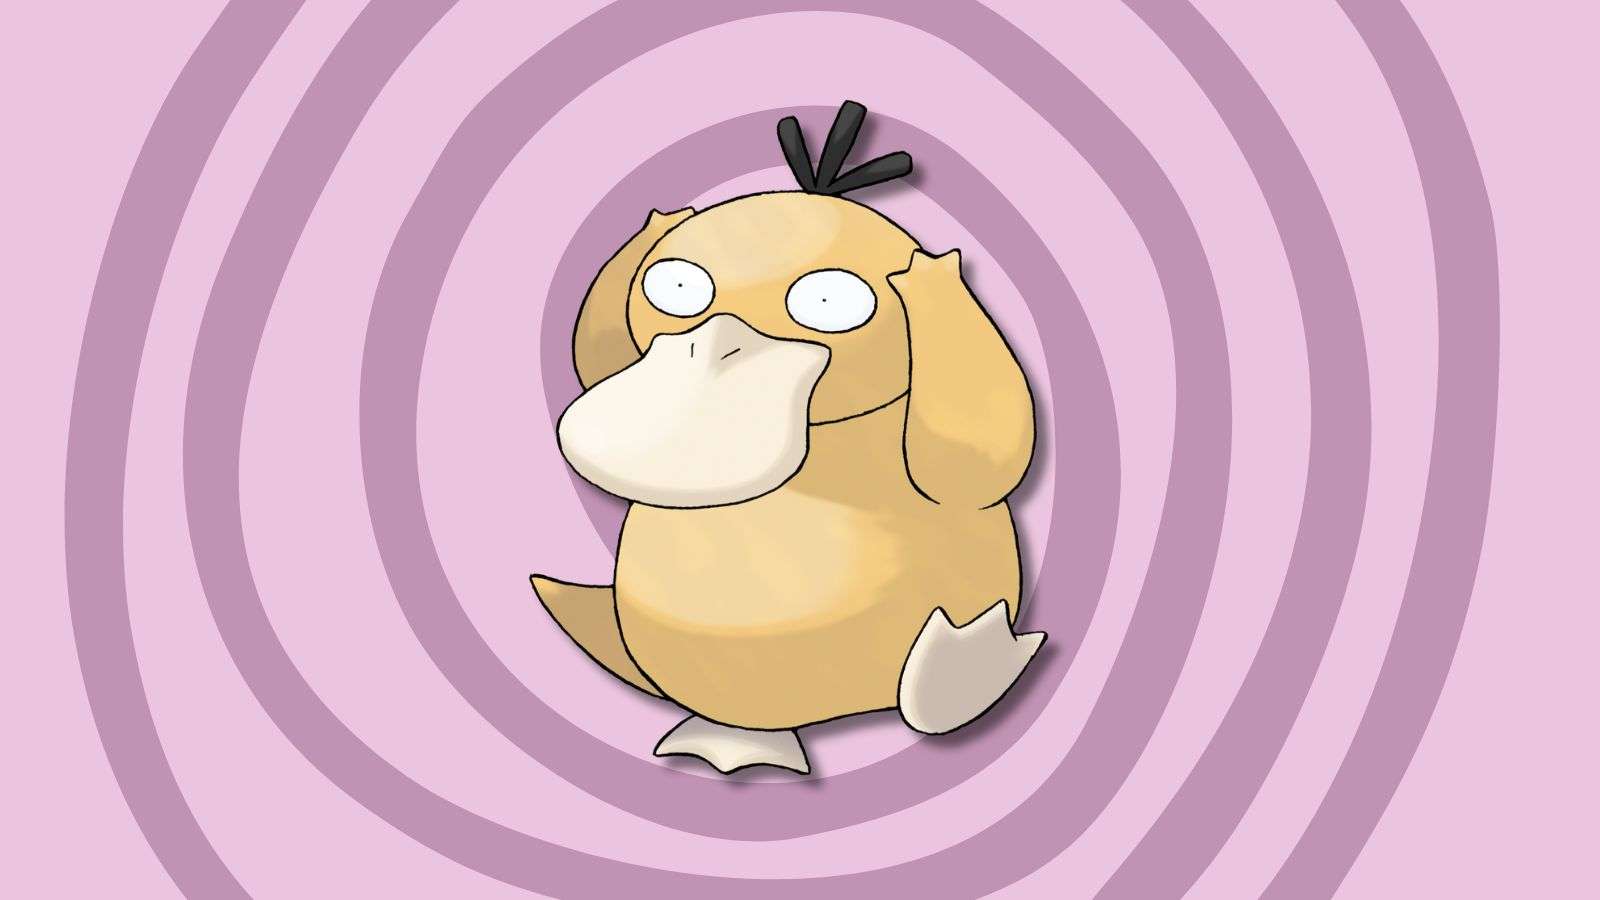 Psyduck Pokemon with swirling background